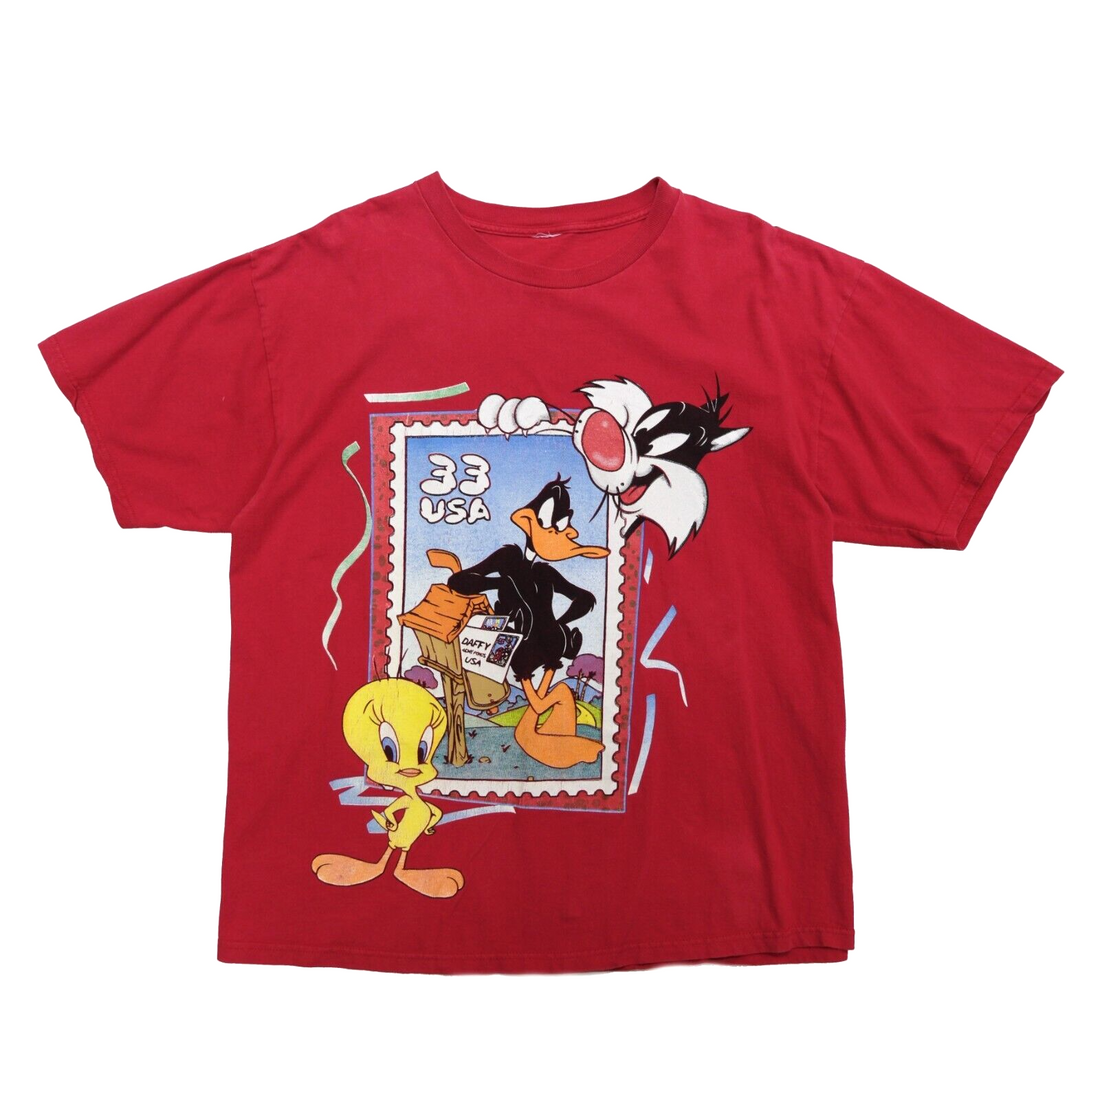 Vintage Looney Tunes Stamp T-Shirt Size Large Red Tweety Daffy